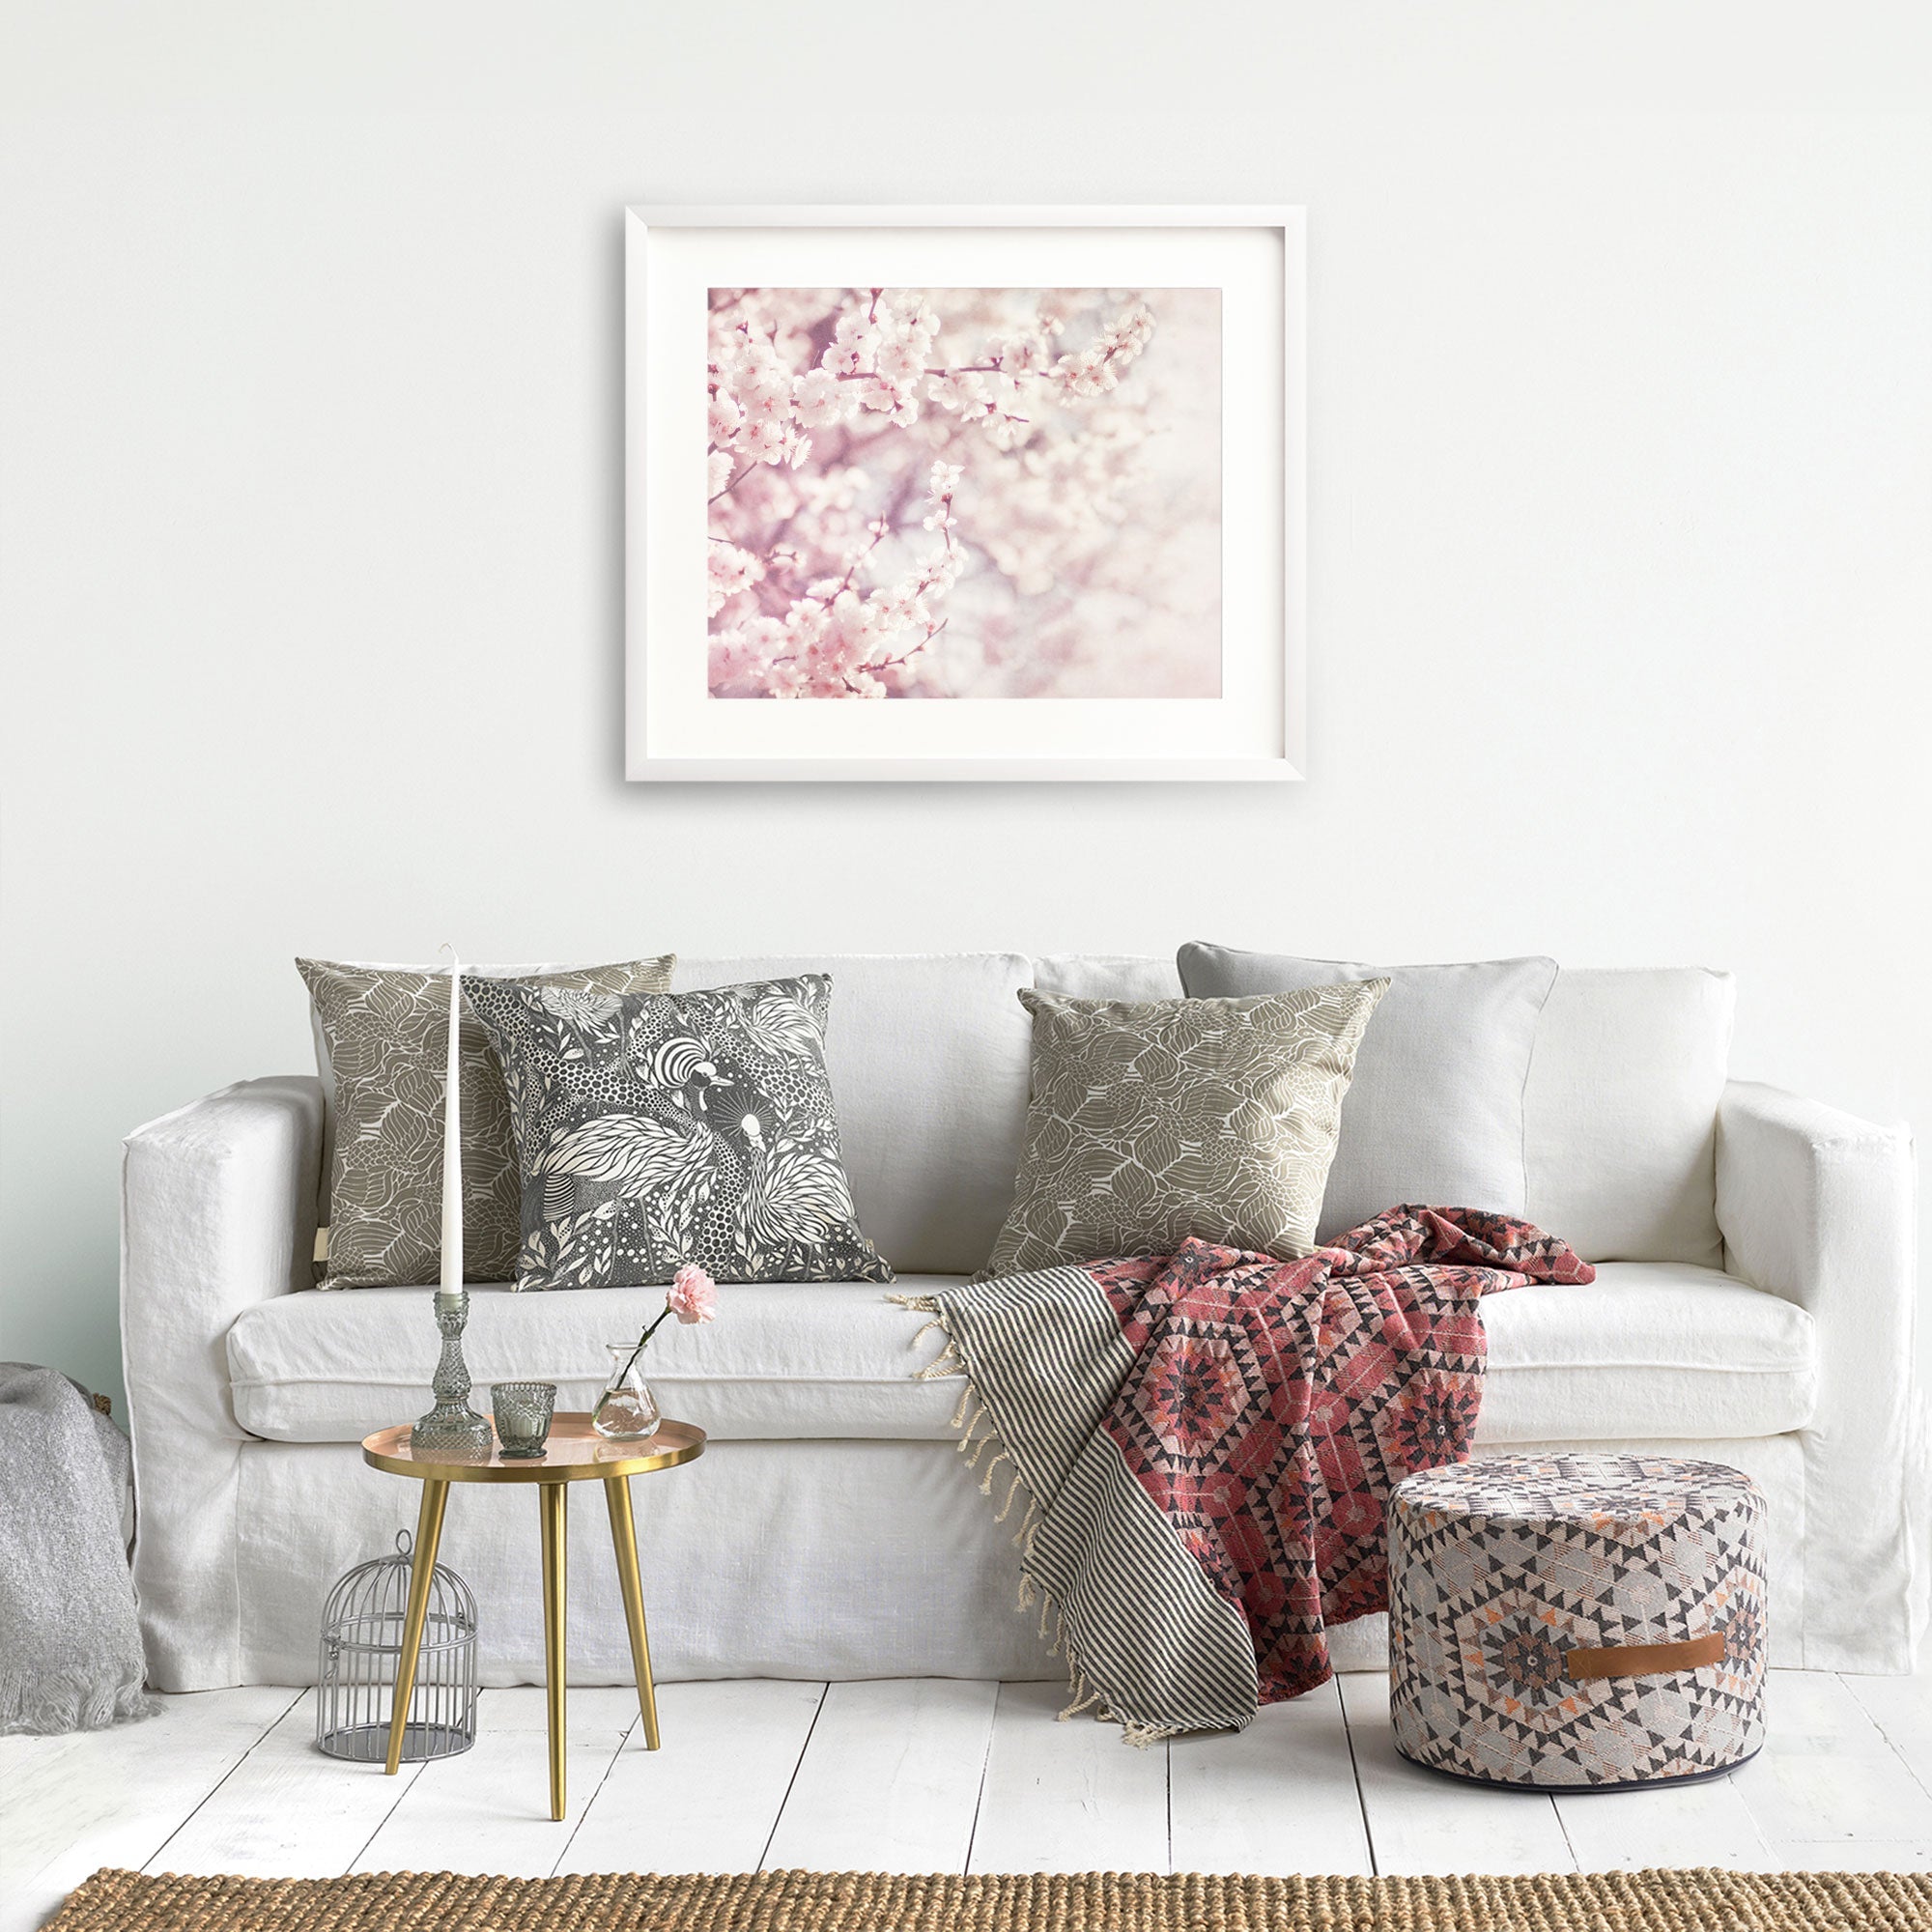 A cozy living room corner with a white sofa adorned with patterned cushions, a pink and gray throw blanket, a small round glass table, a decorative birdcage, and the Offley Green Pink Floral Print, &#39;Dreamy Blossom.&#39;